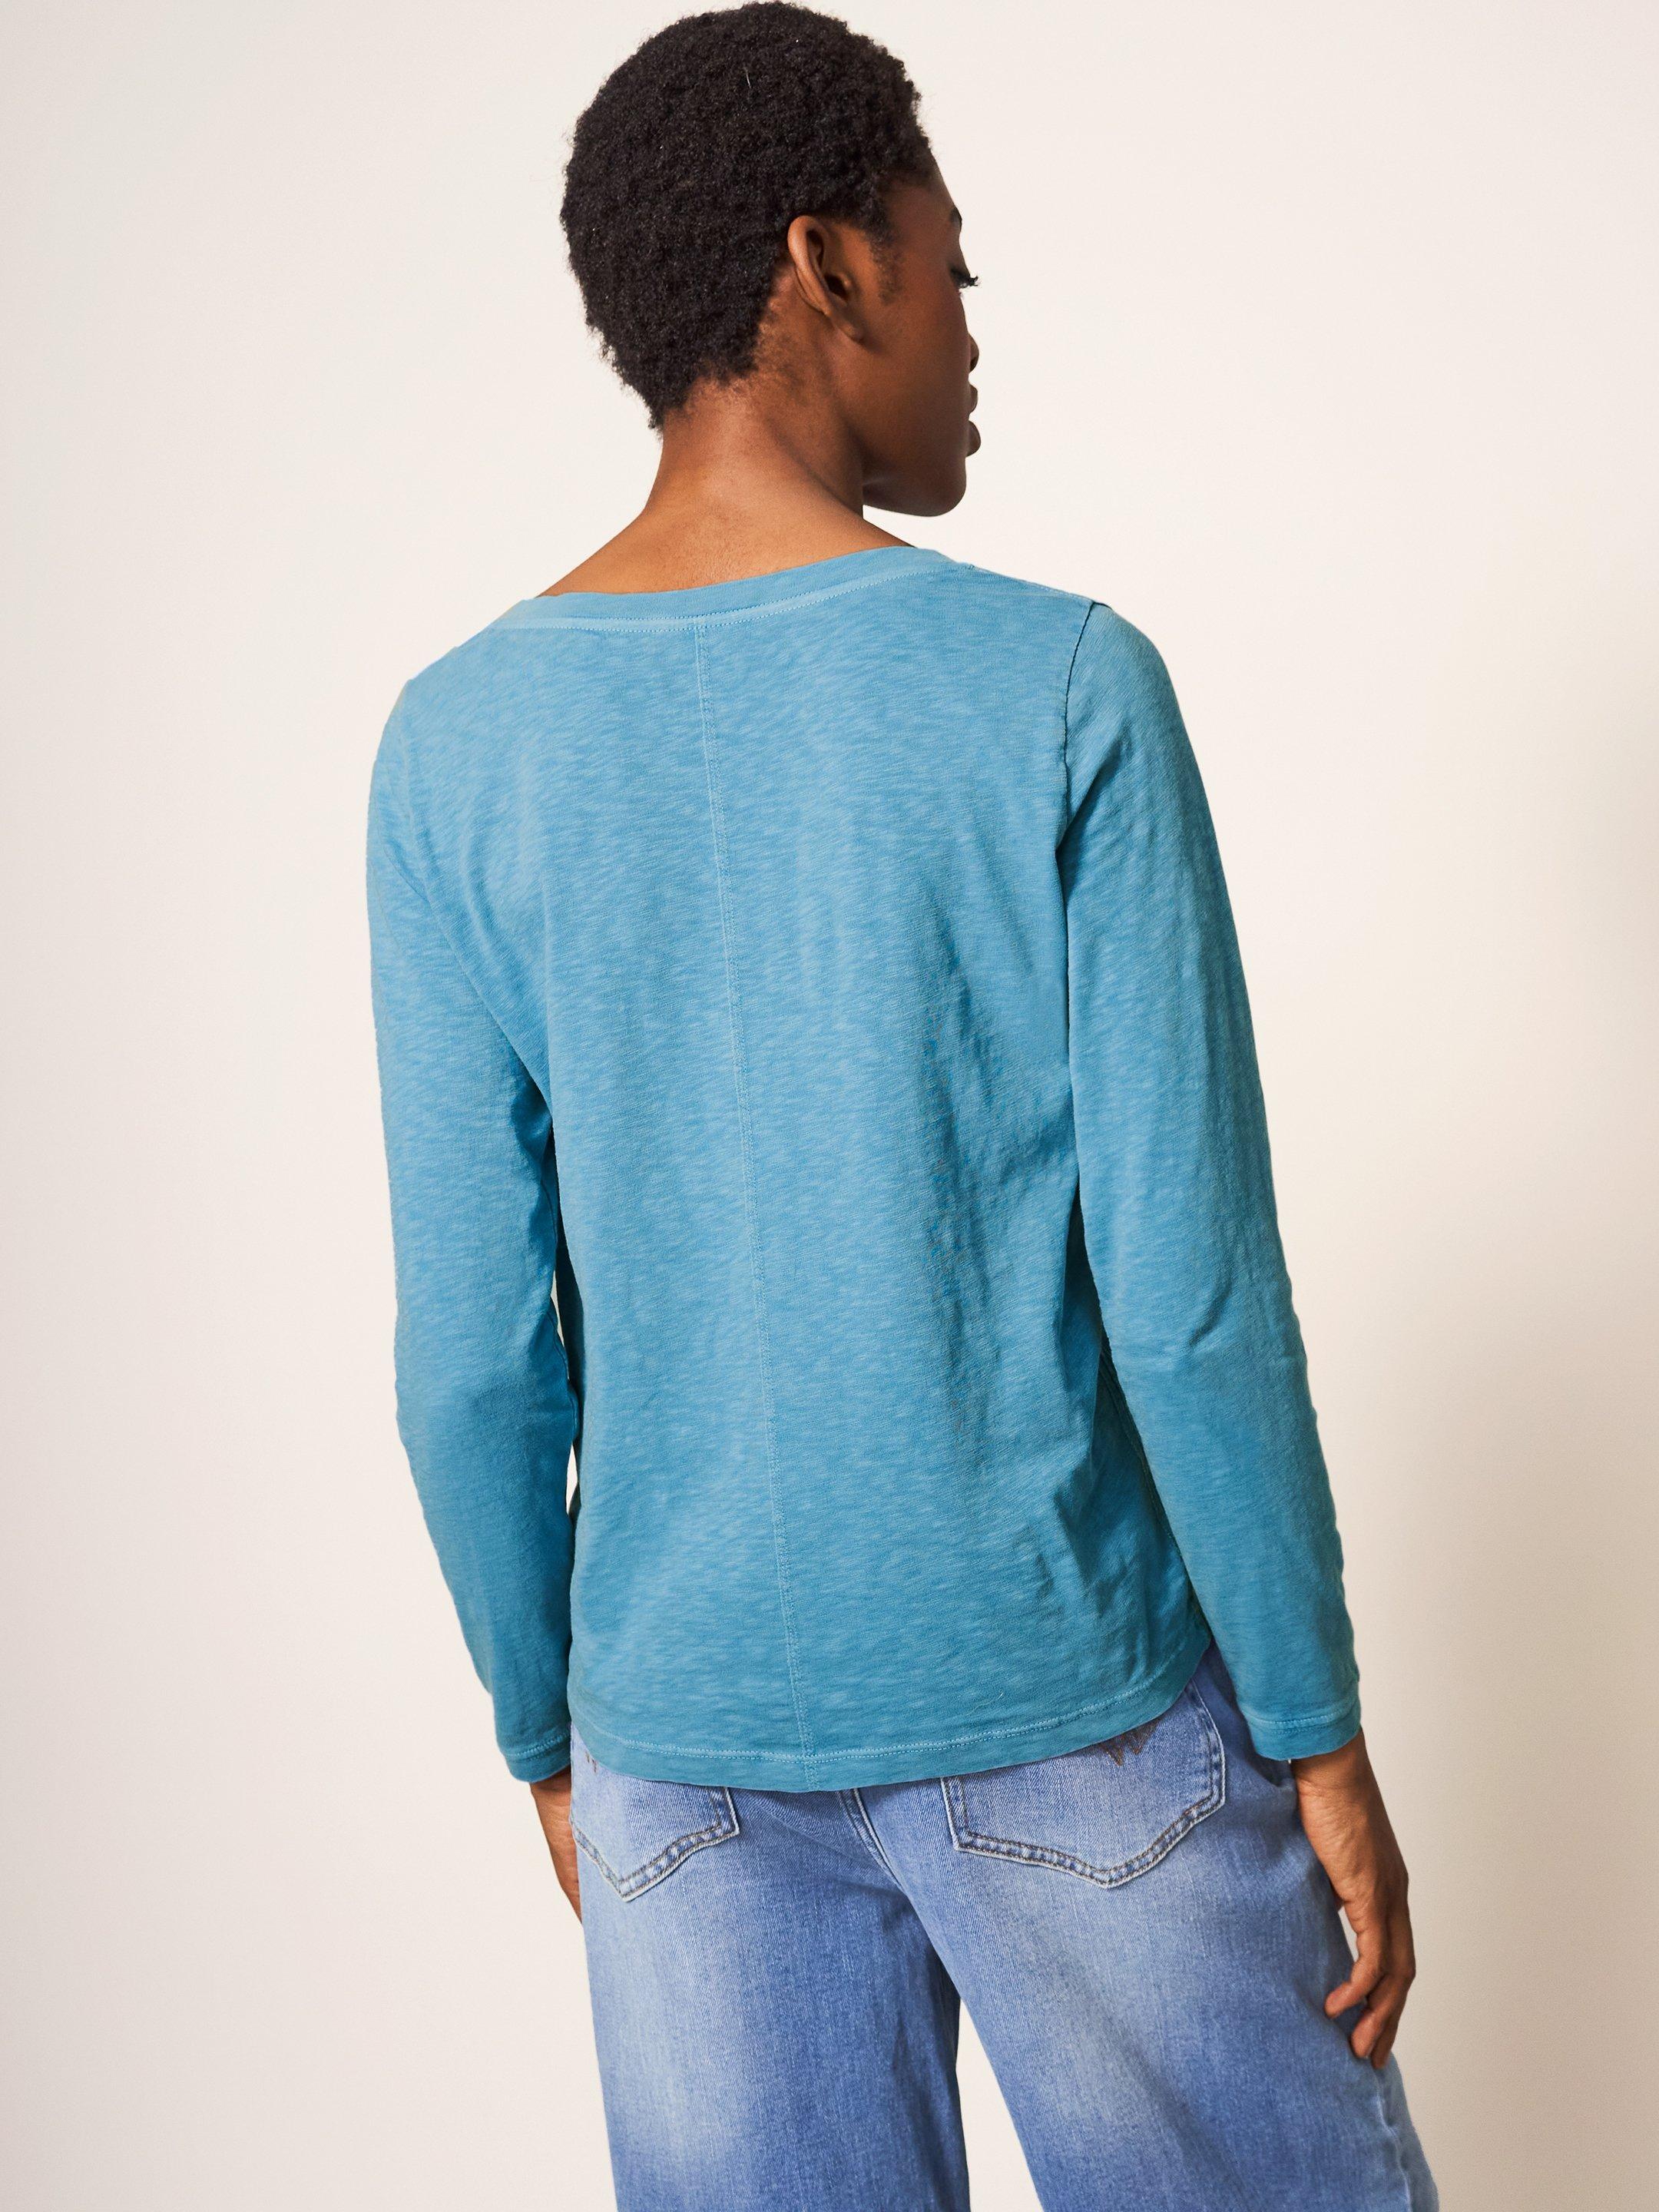 Nelly LS Tee in MID BLUE - MODEL BACK